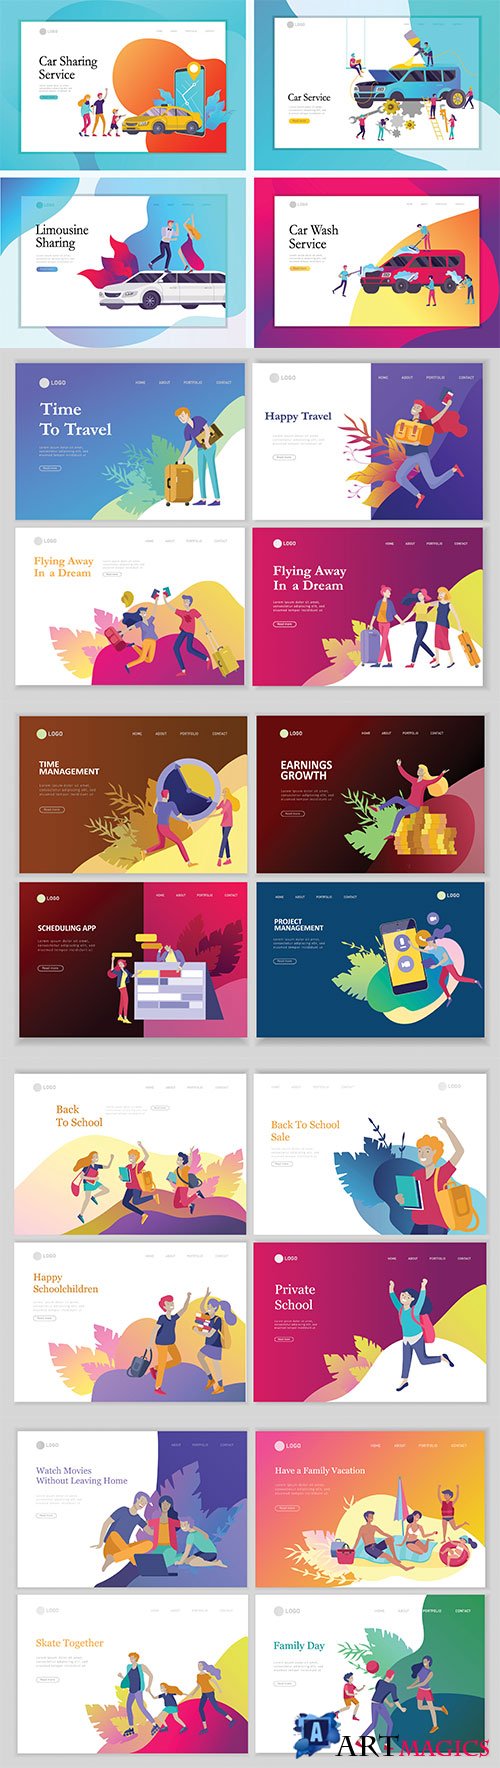 Website page isometric vector, flat banner concept illustration # 19